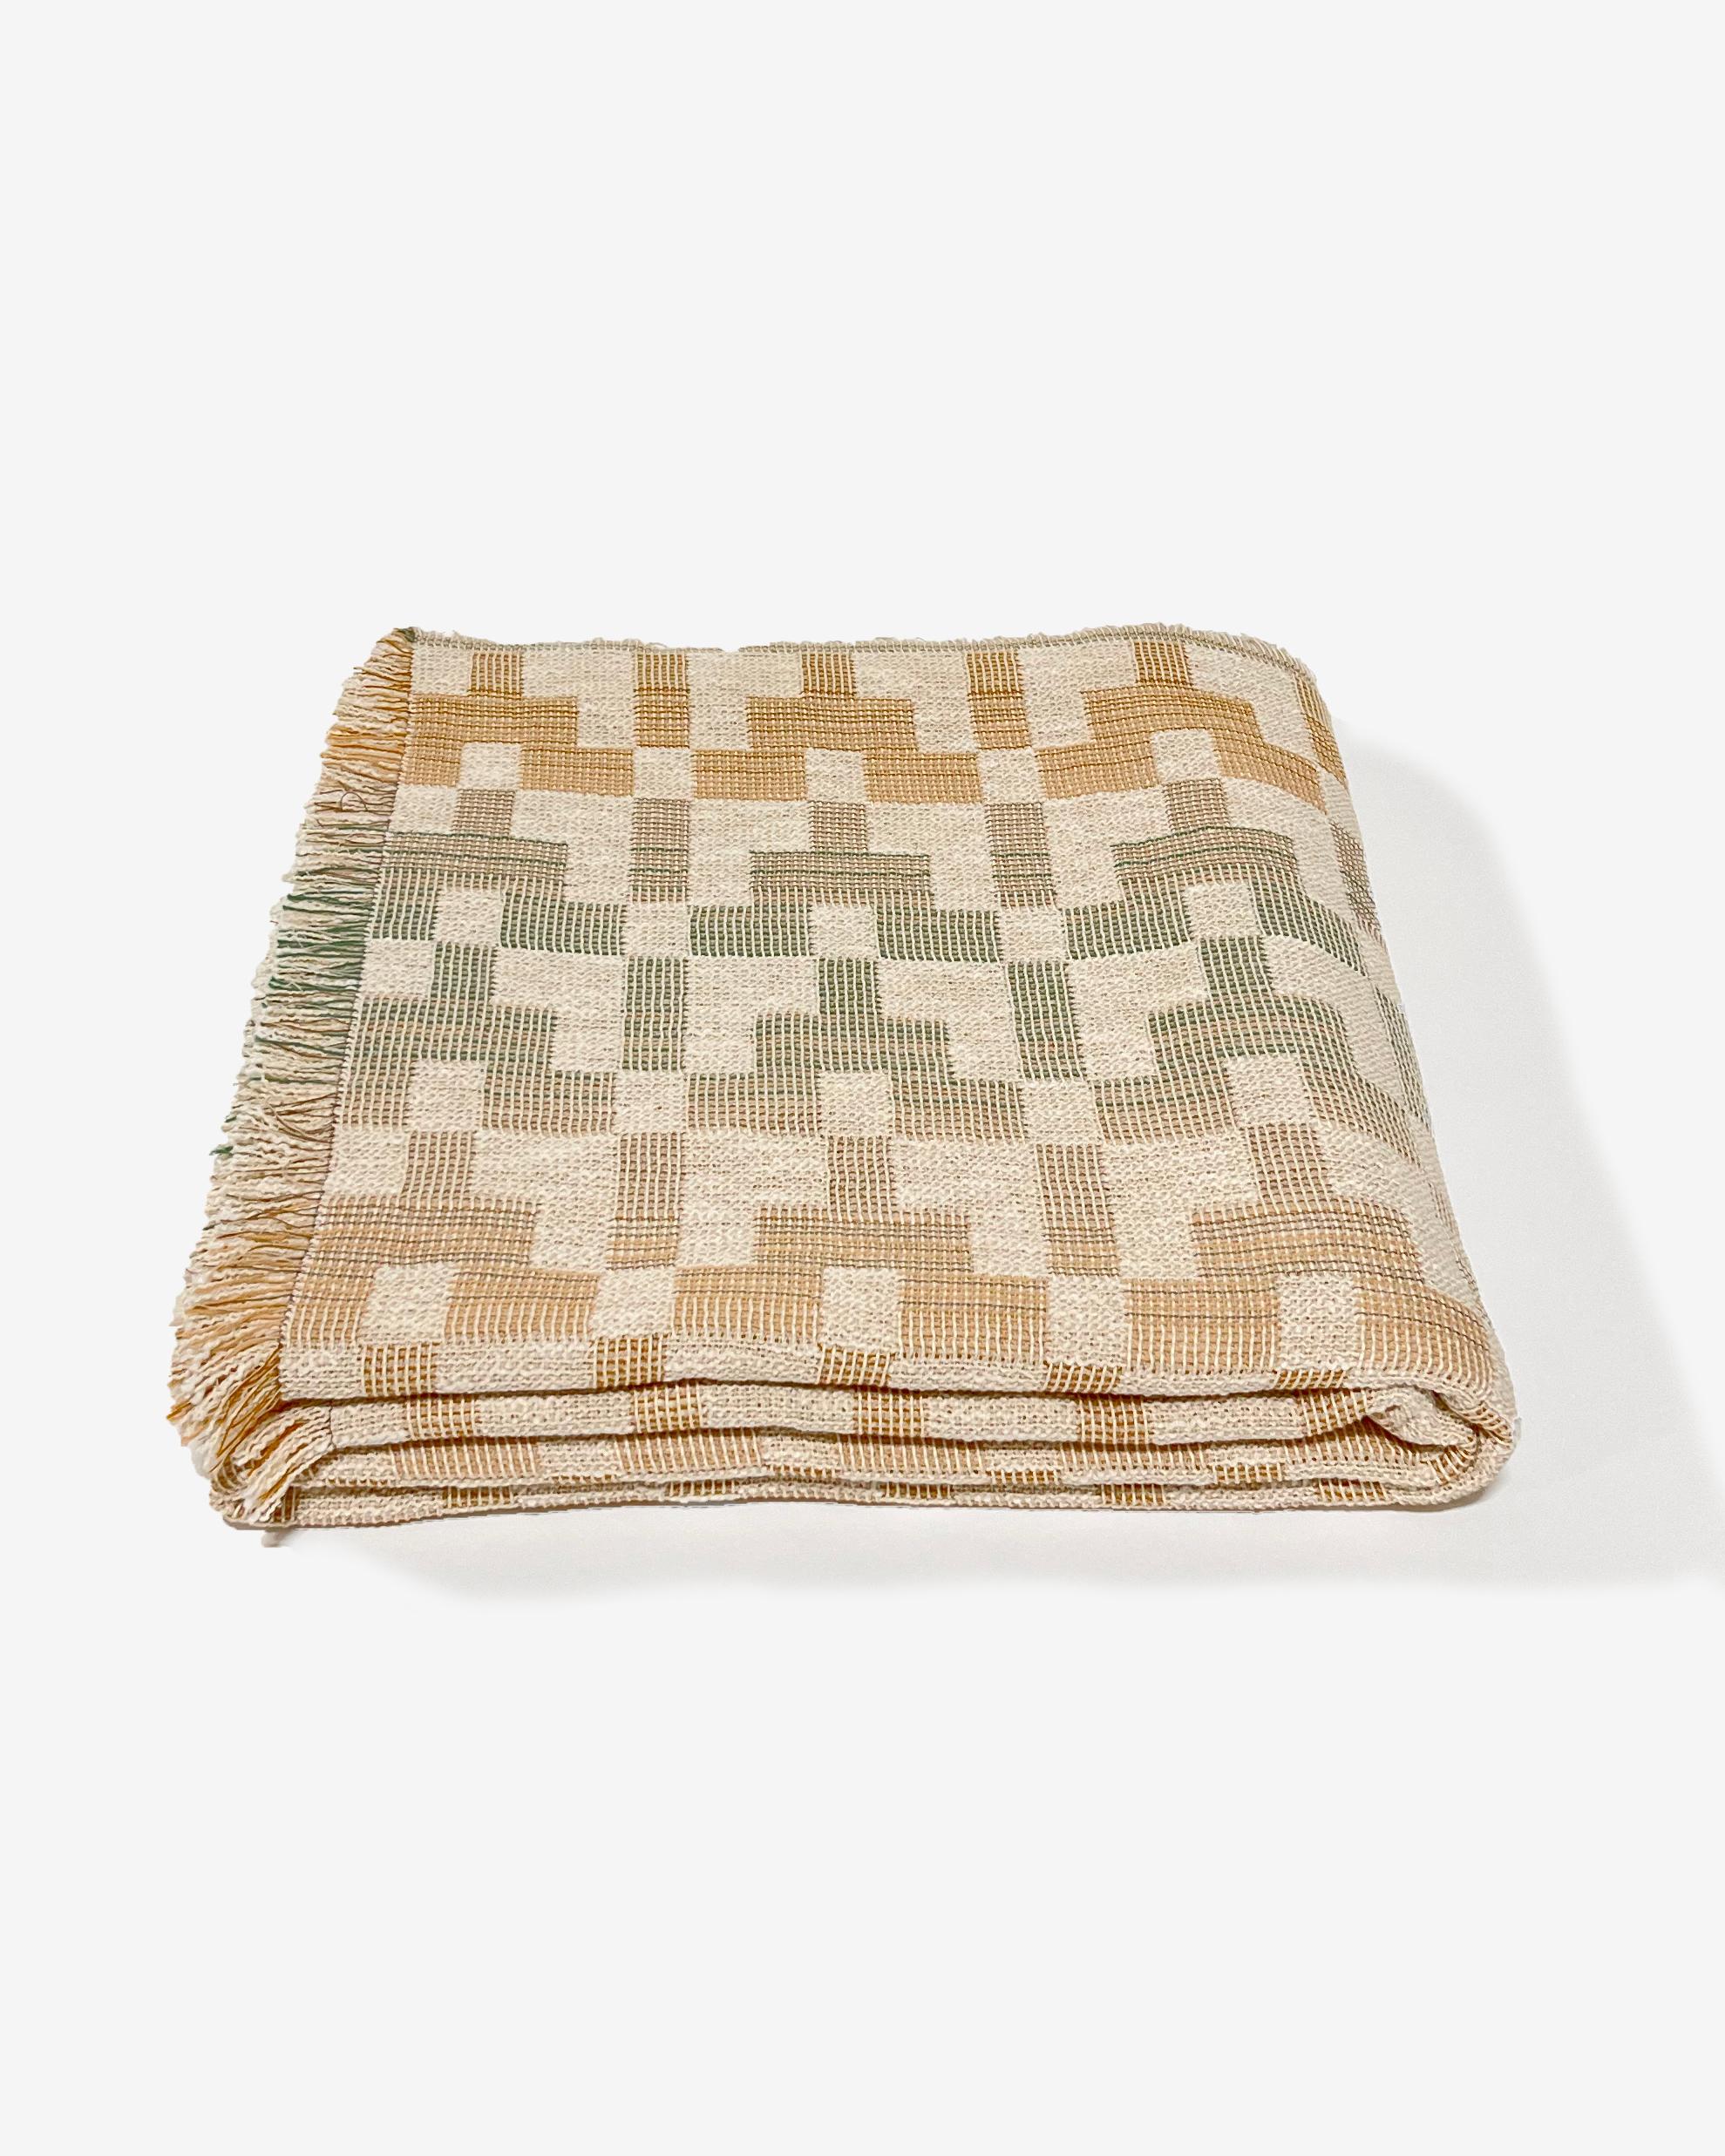 The 'Esme' throw blanket is designed by Folk Textiles—a LA based brand dedicated to thoughtful living. This textile is woven on a Dobby loom in the UK using sustainably-dyed organic cotton from Italy. 

The 'Esme' pattern in particular is inspired